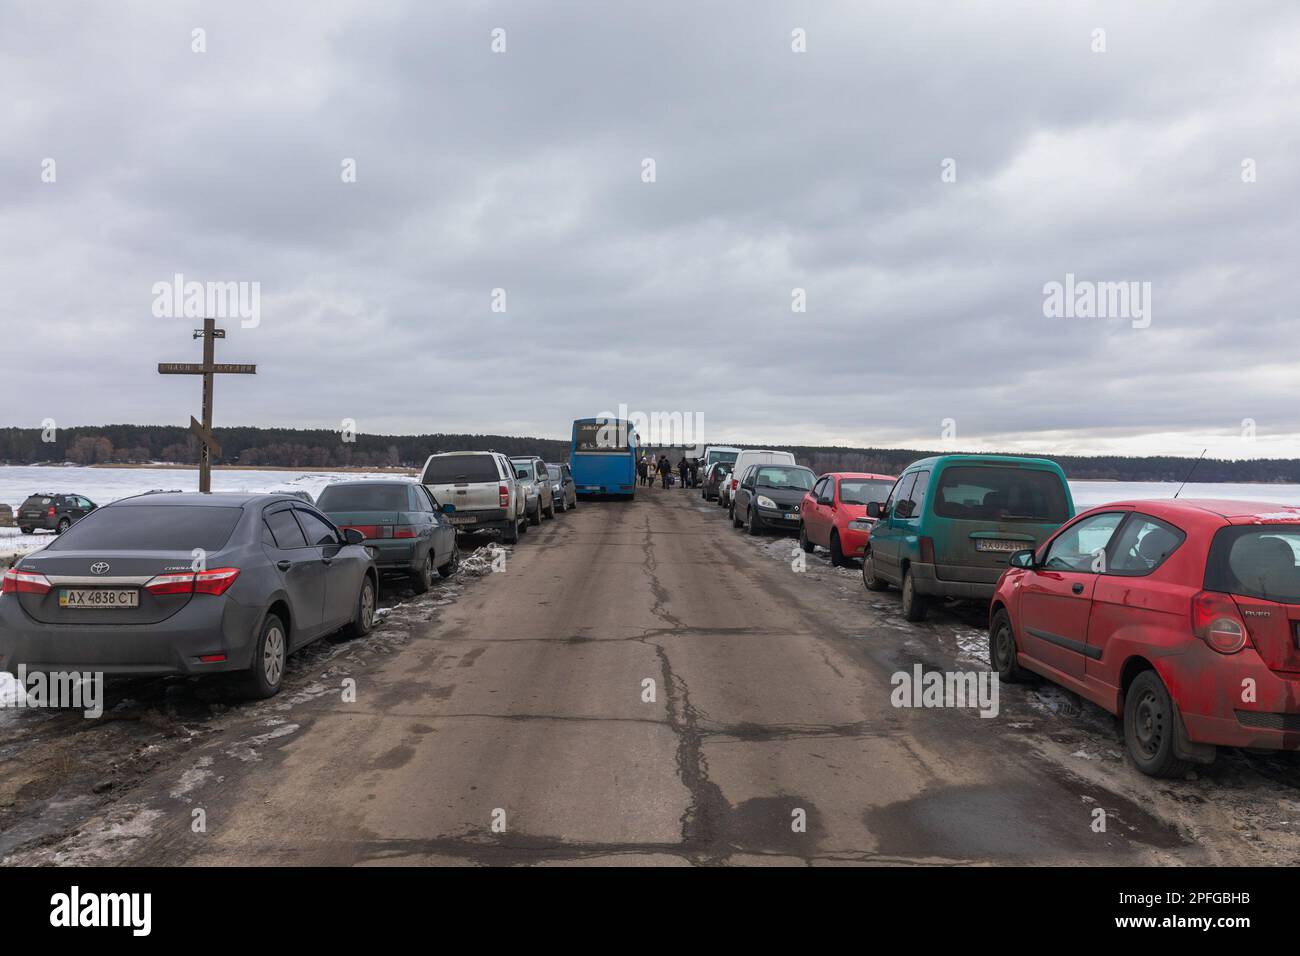 View of cars parked in front of a pedestrian crossing near the destroyed bridge over Siverskyi Donets in Stariy Saltiv in Kharkiv region. Consequences of the war of aggression of the Russian Federation in the Kharkiv region of Ukraine. Destroyed houses, bridges, power lines. After de-occupation, life is being rebuilt and Ukrainians are actively rebuilding what can be rebuilt. (Photo by Mykhaylo Palinchak / SOPA Images/Sipa USA) Stock Photo